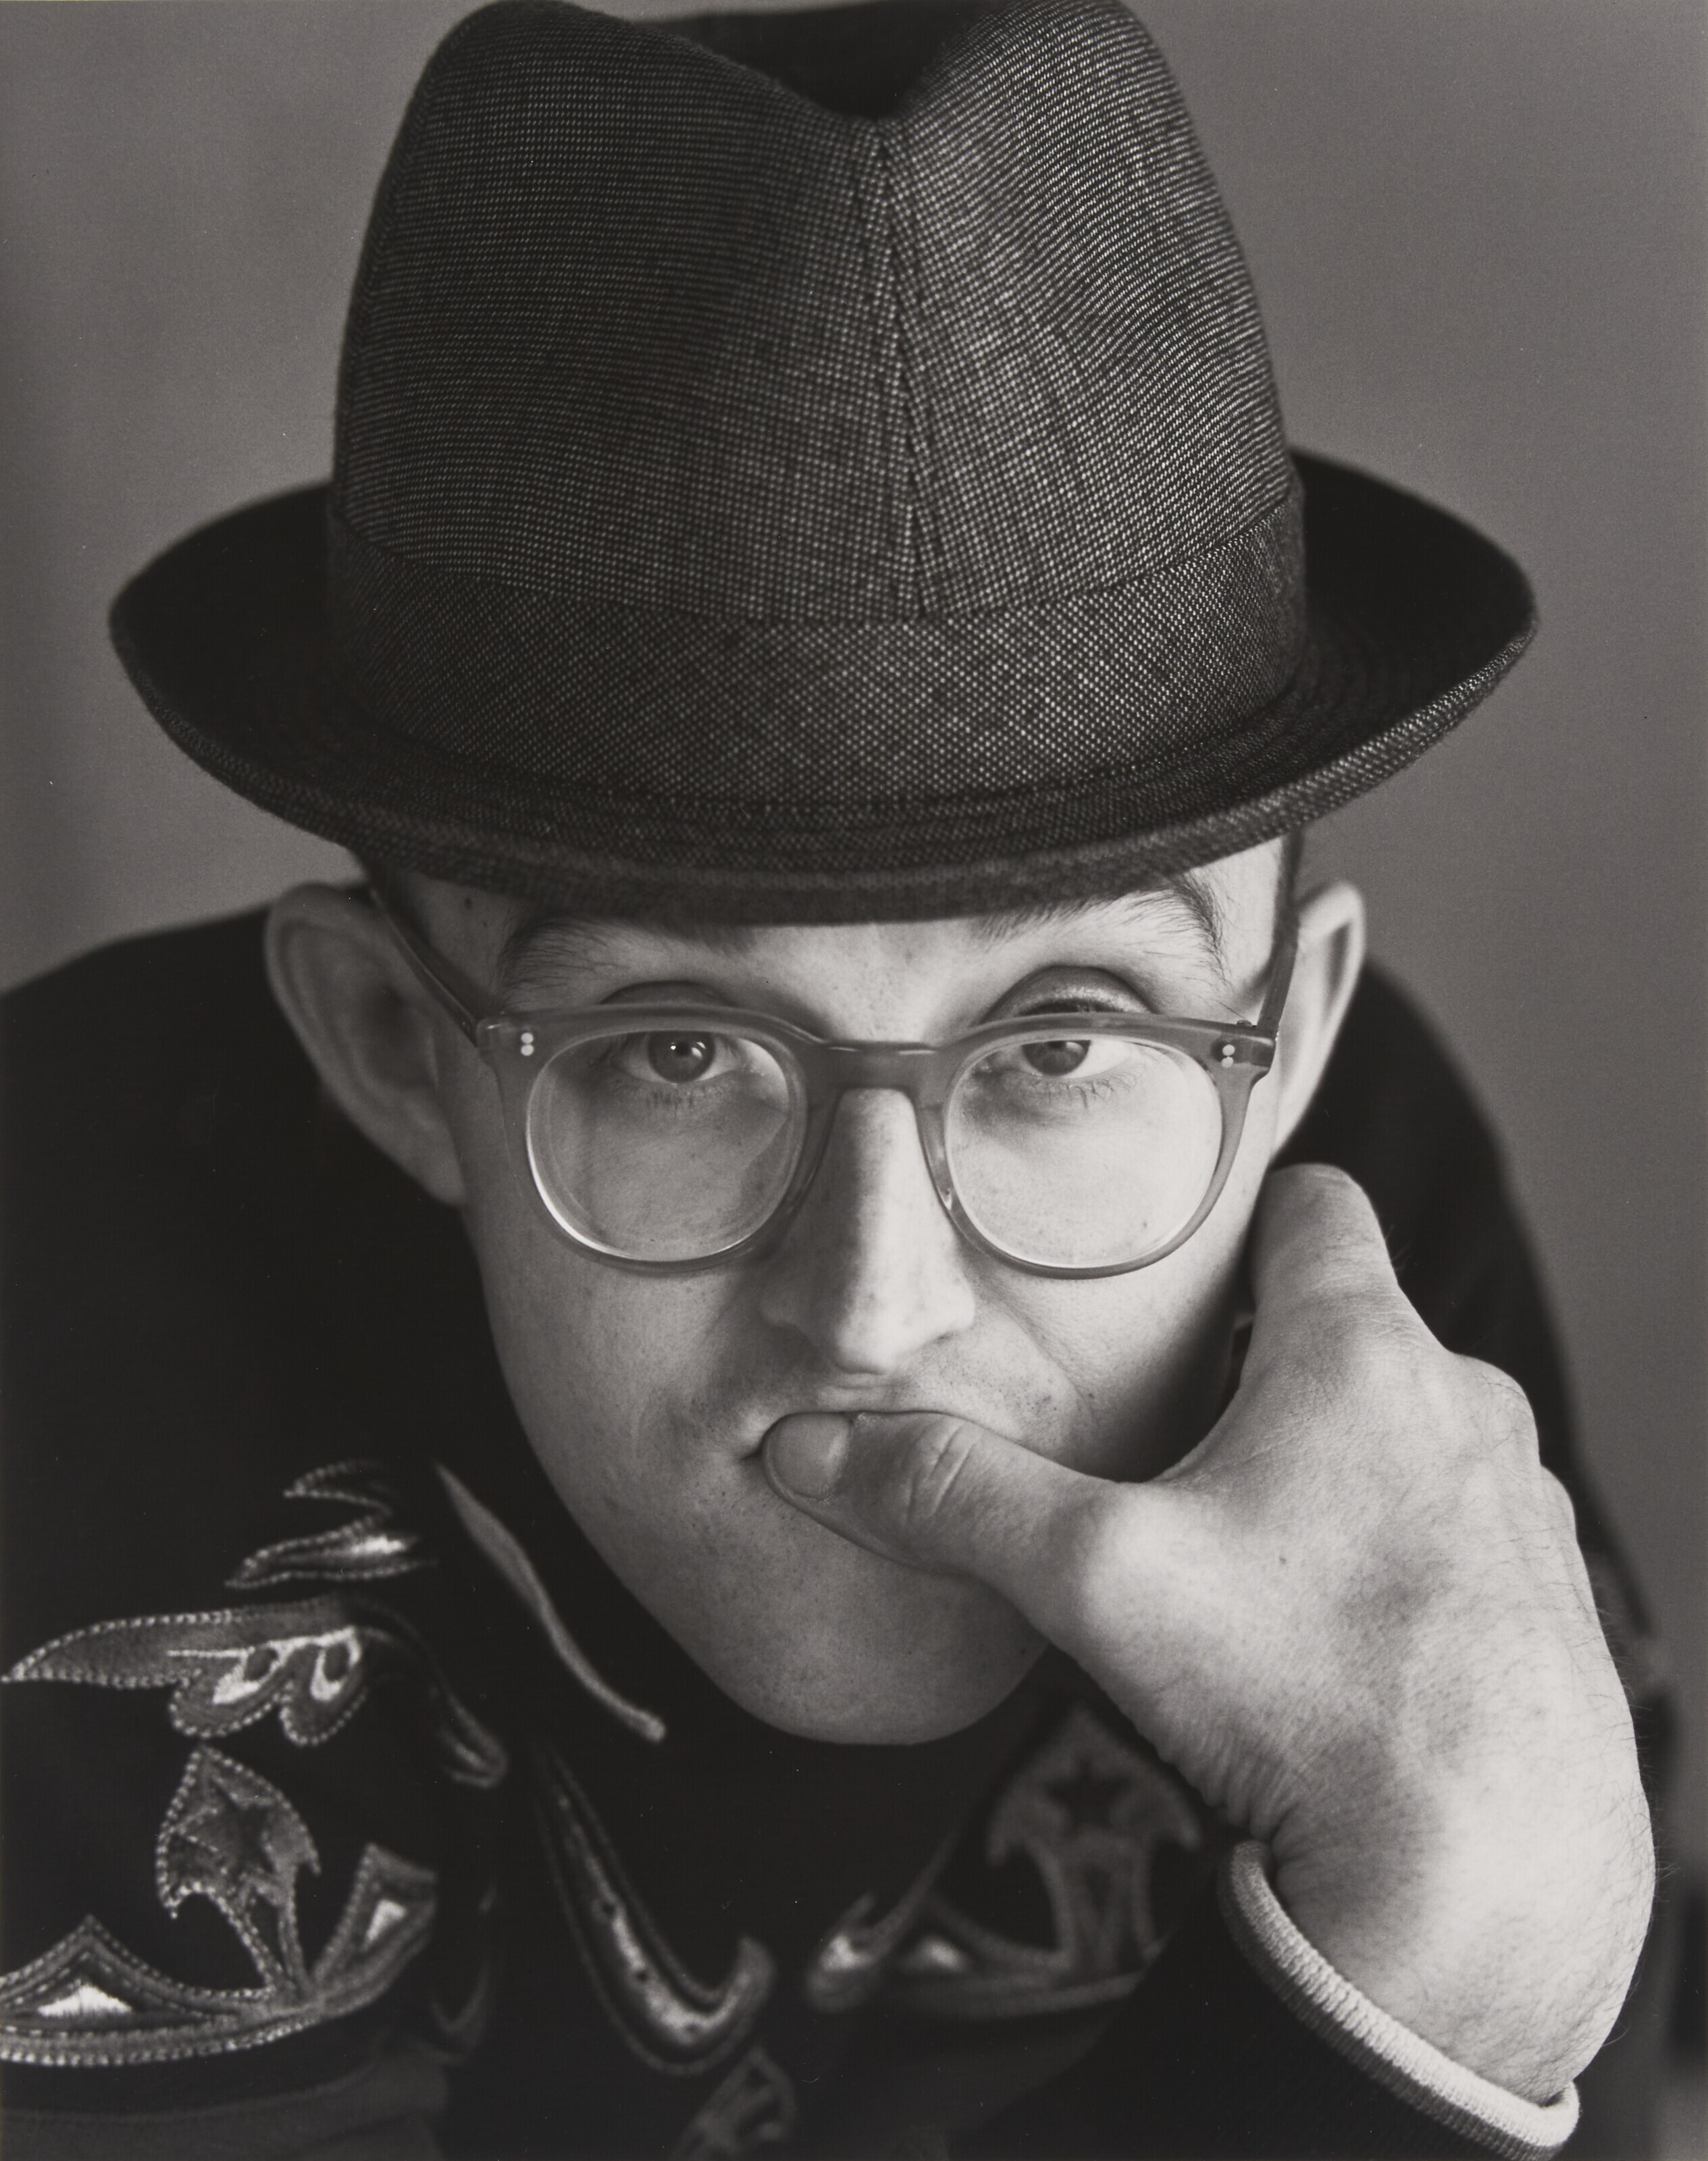 Keith Haring I, New York by Herb Ritts, 1987